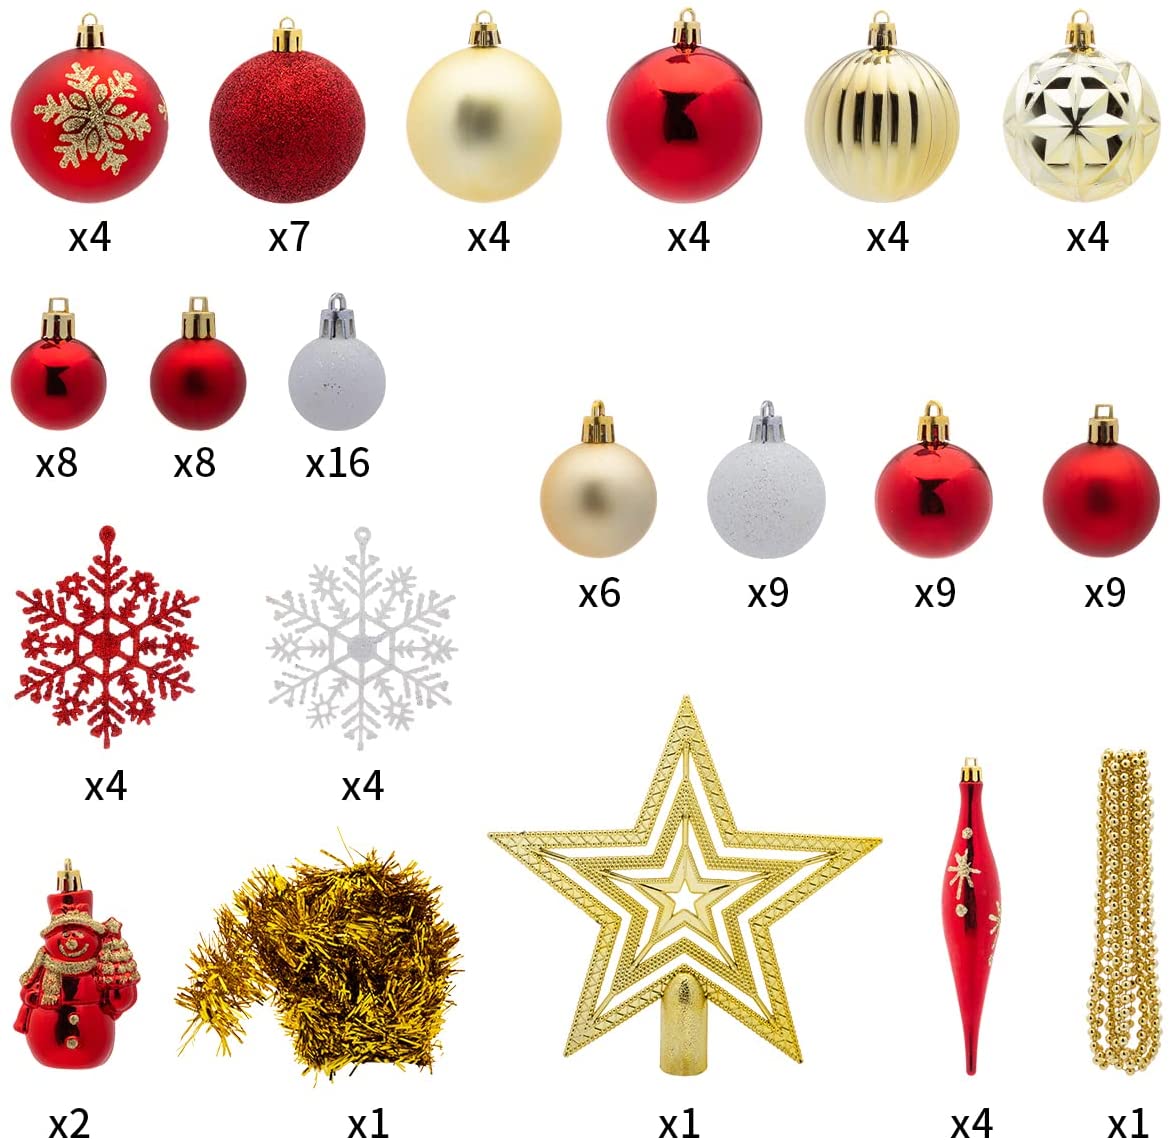 110 Pcs Christmas Assorted Ornaments with a Star Tree Topper Red, Gold & White